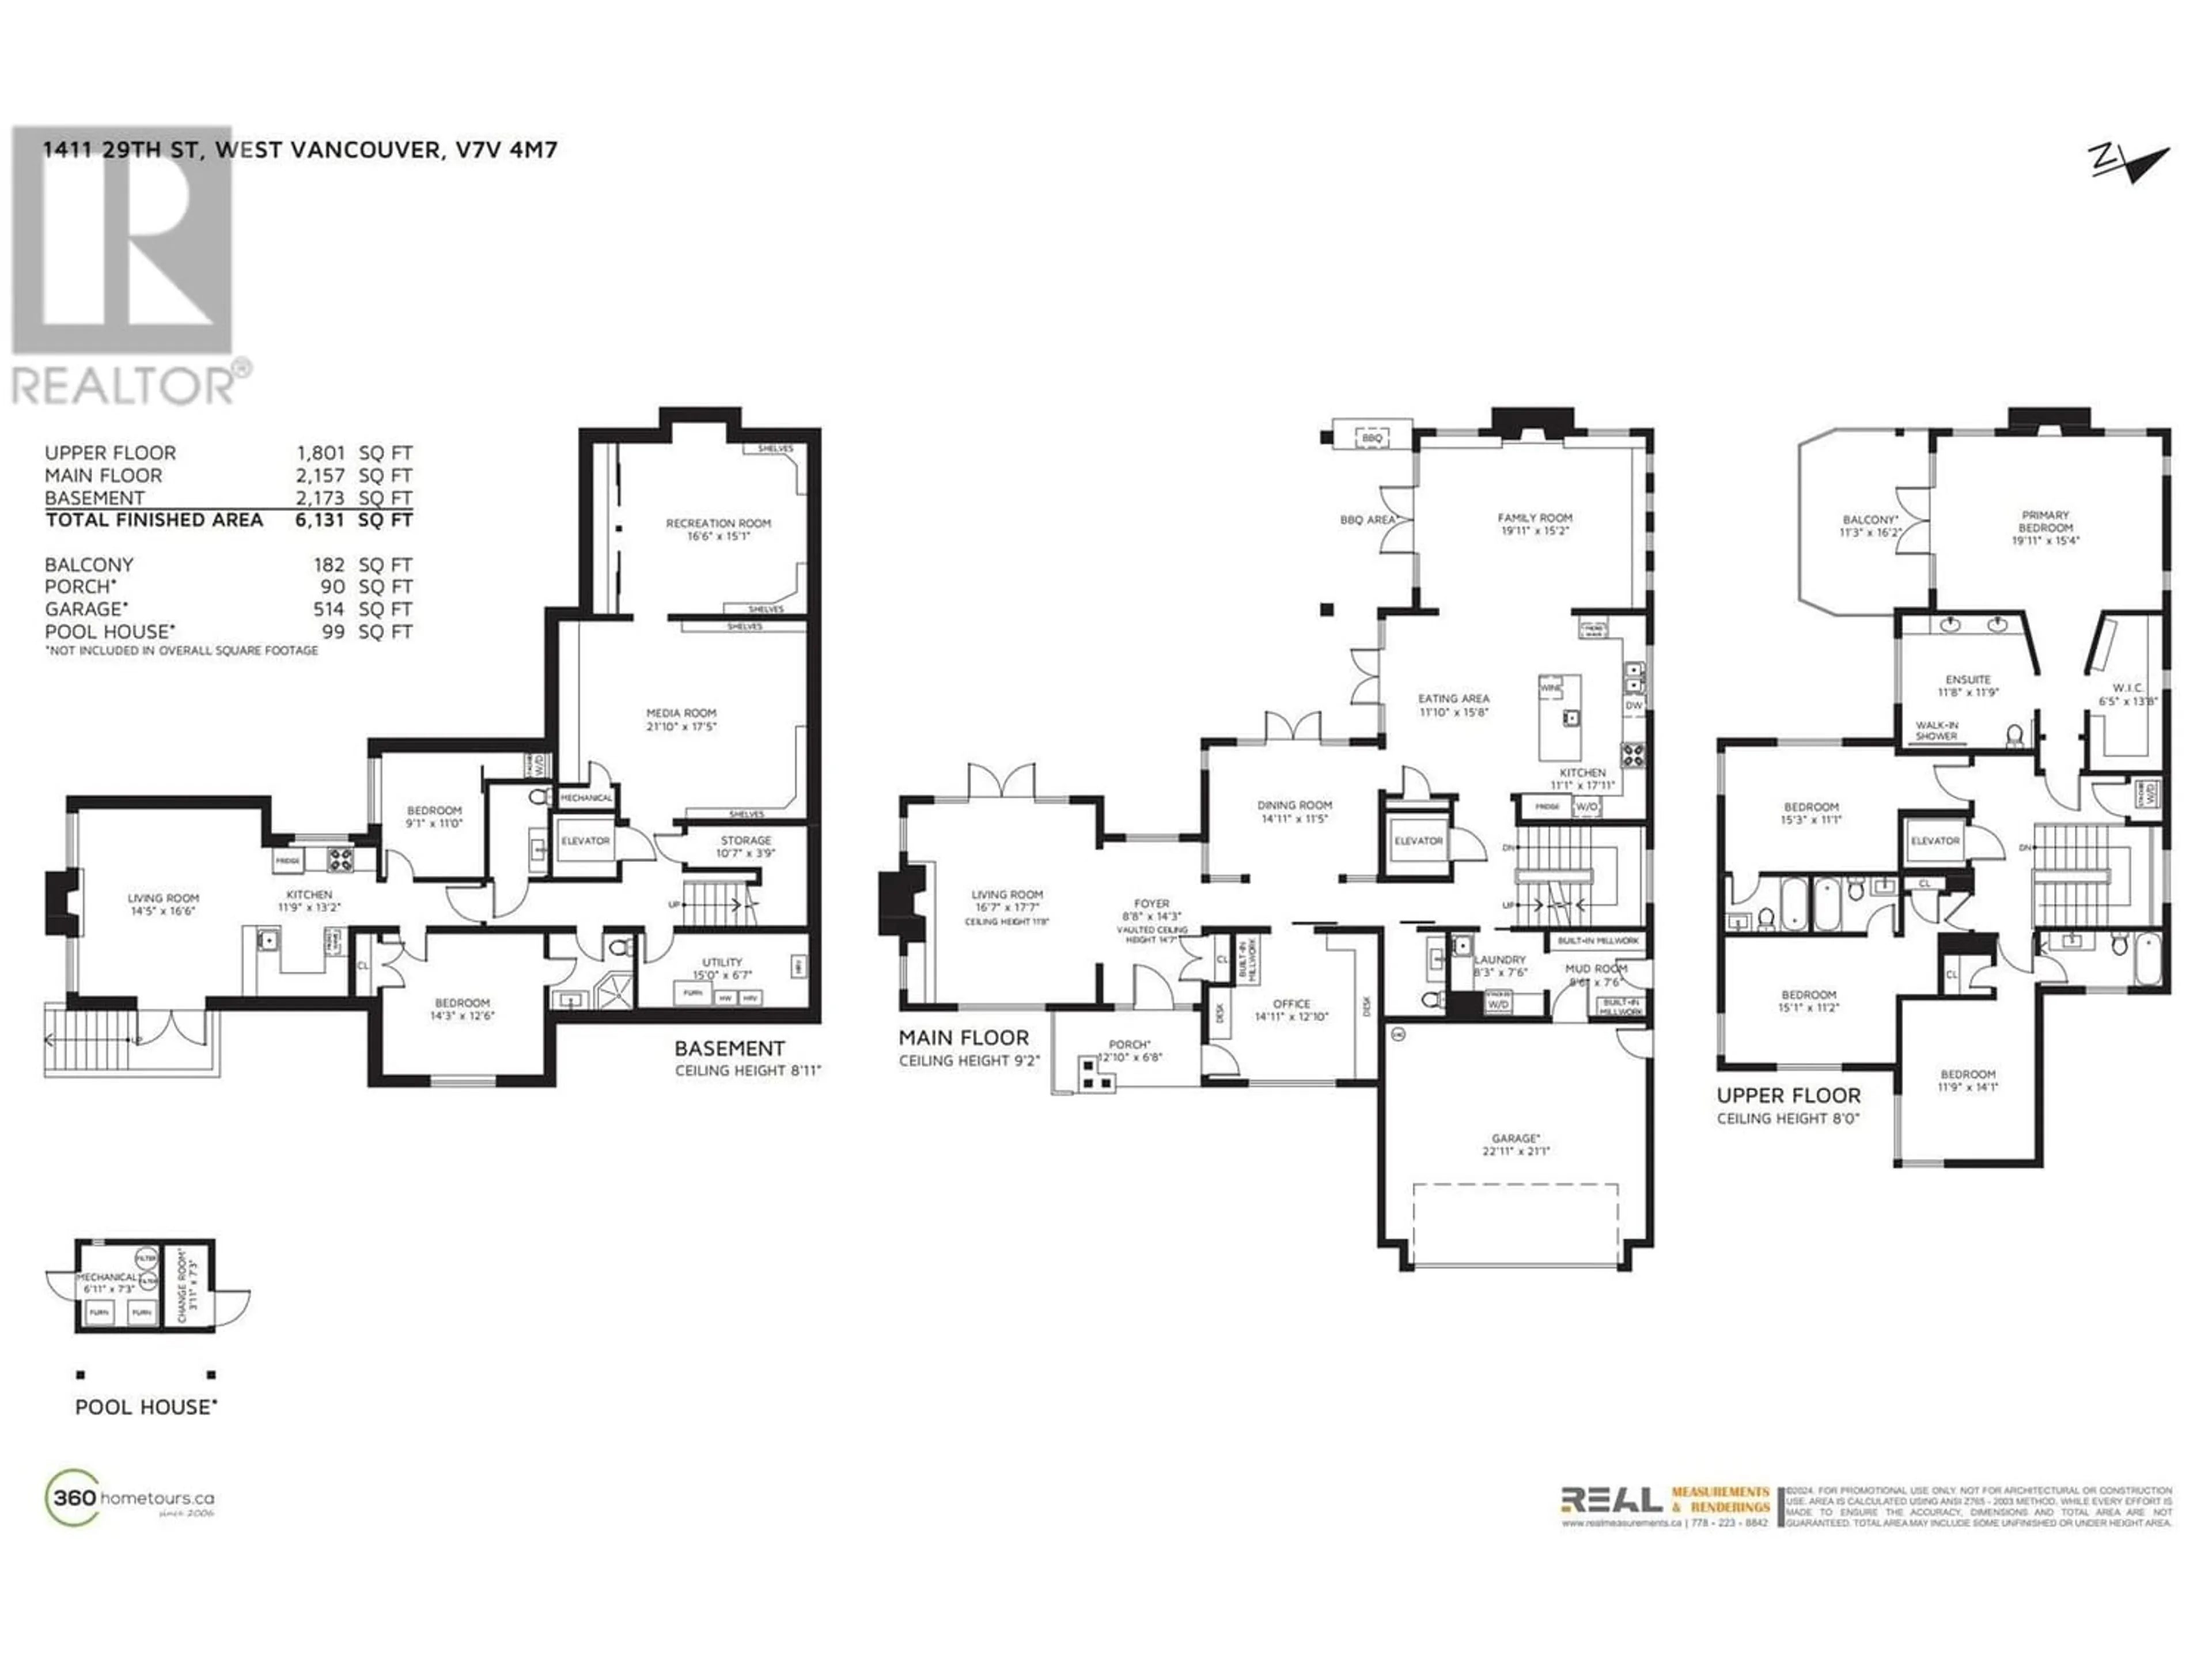 Floor plan for 1411 29TH STREET, West Vancouver British Columbia V7V4M7